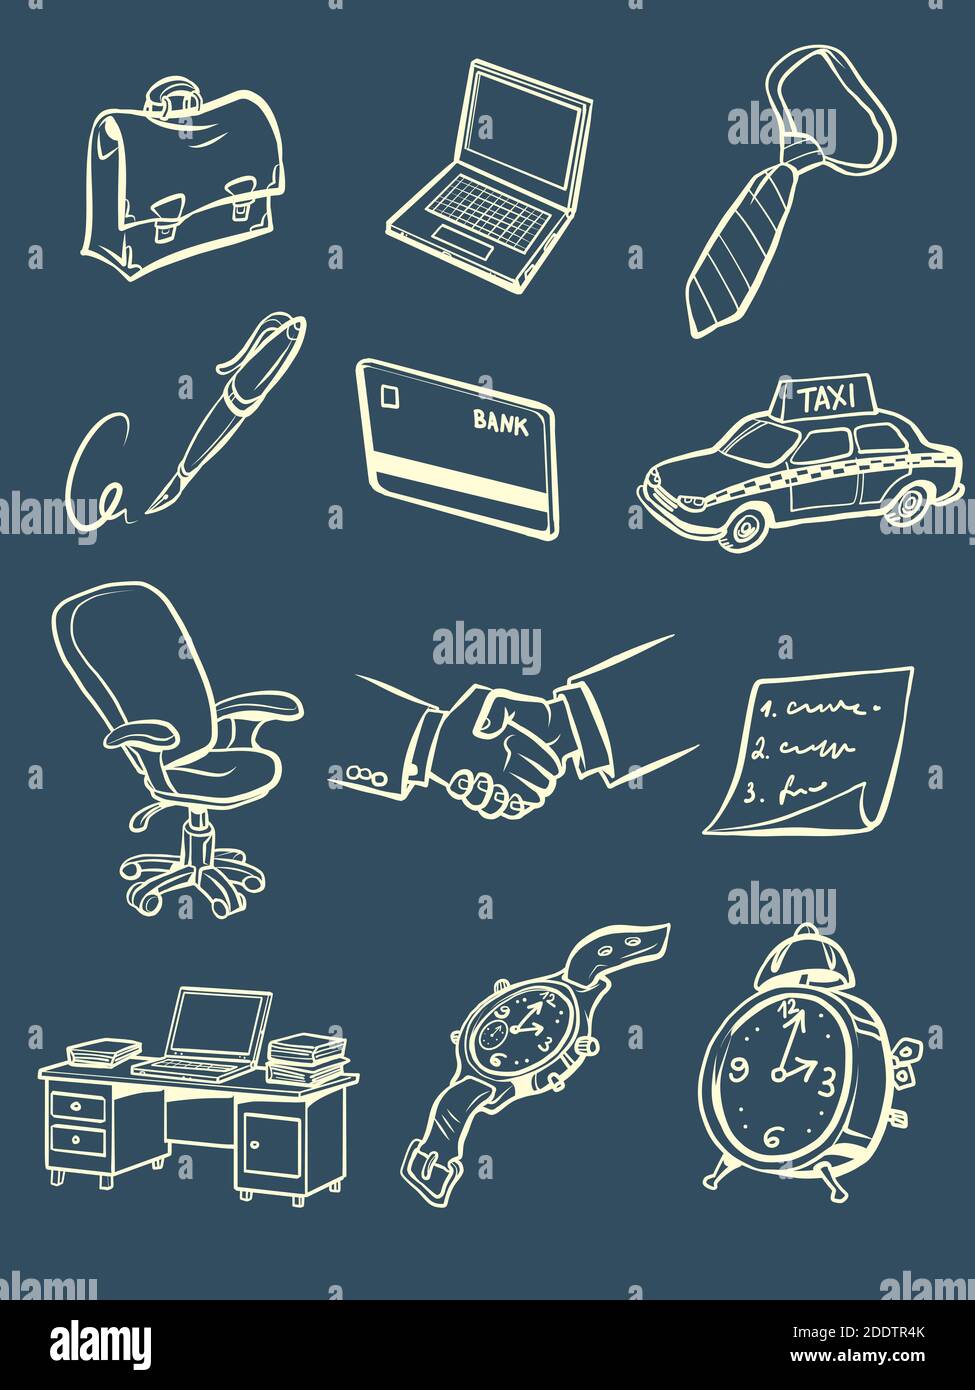 Business accessories things of a businessman collection set icons